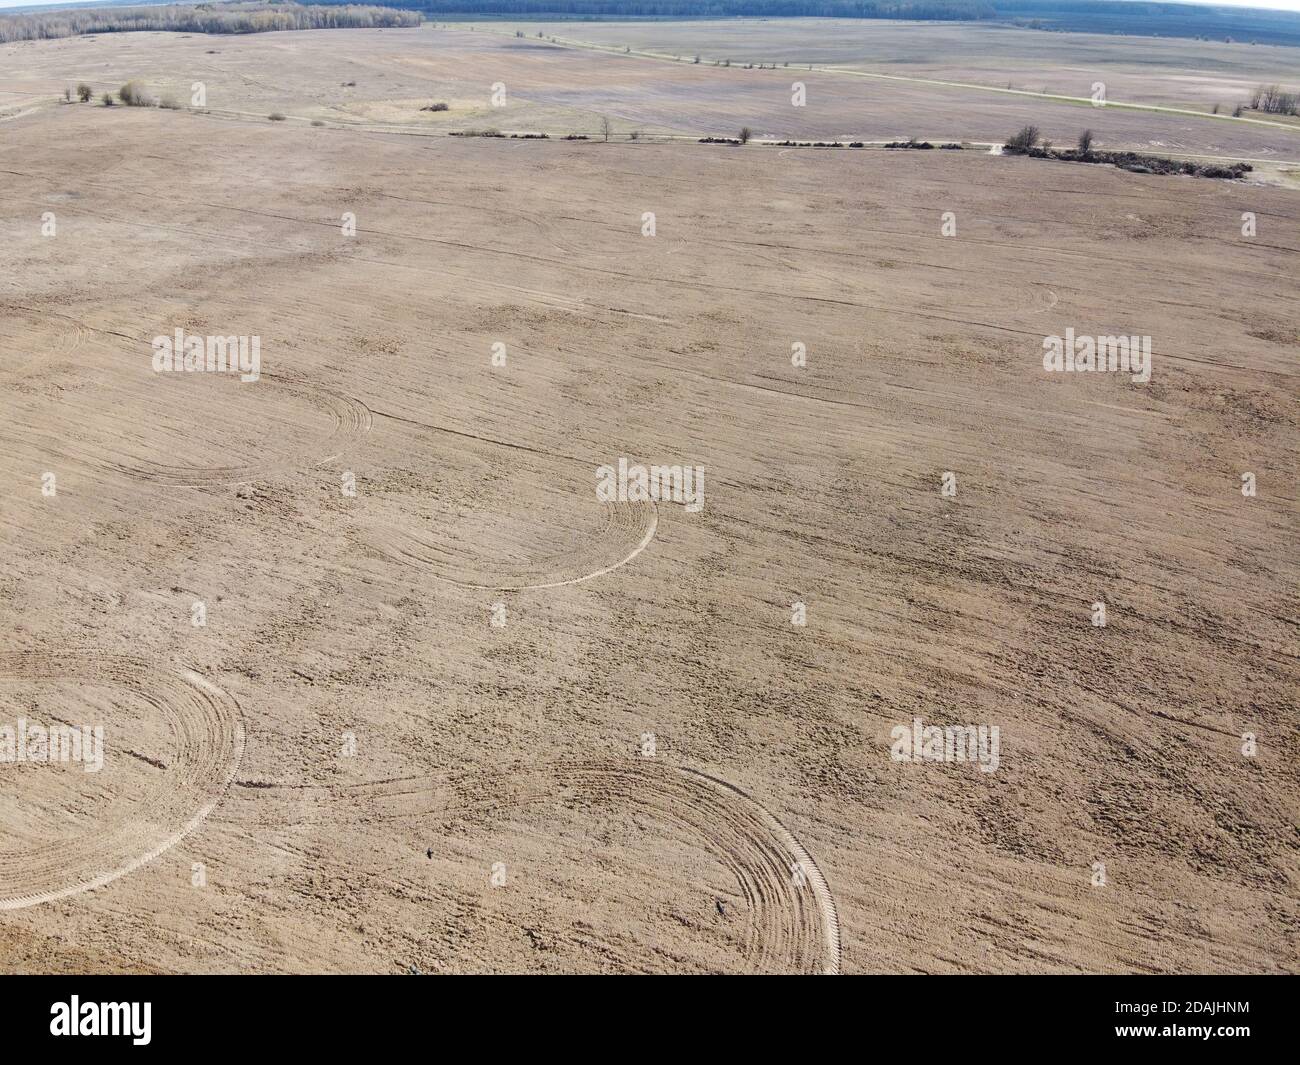 Plowed agricultural field, aerial view. Farmland. Landscape. Stock Photo